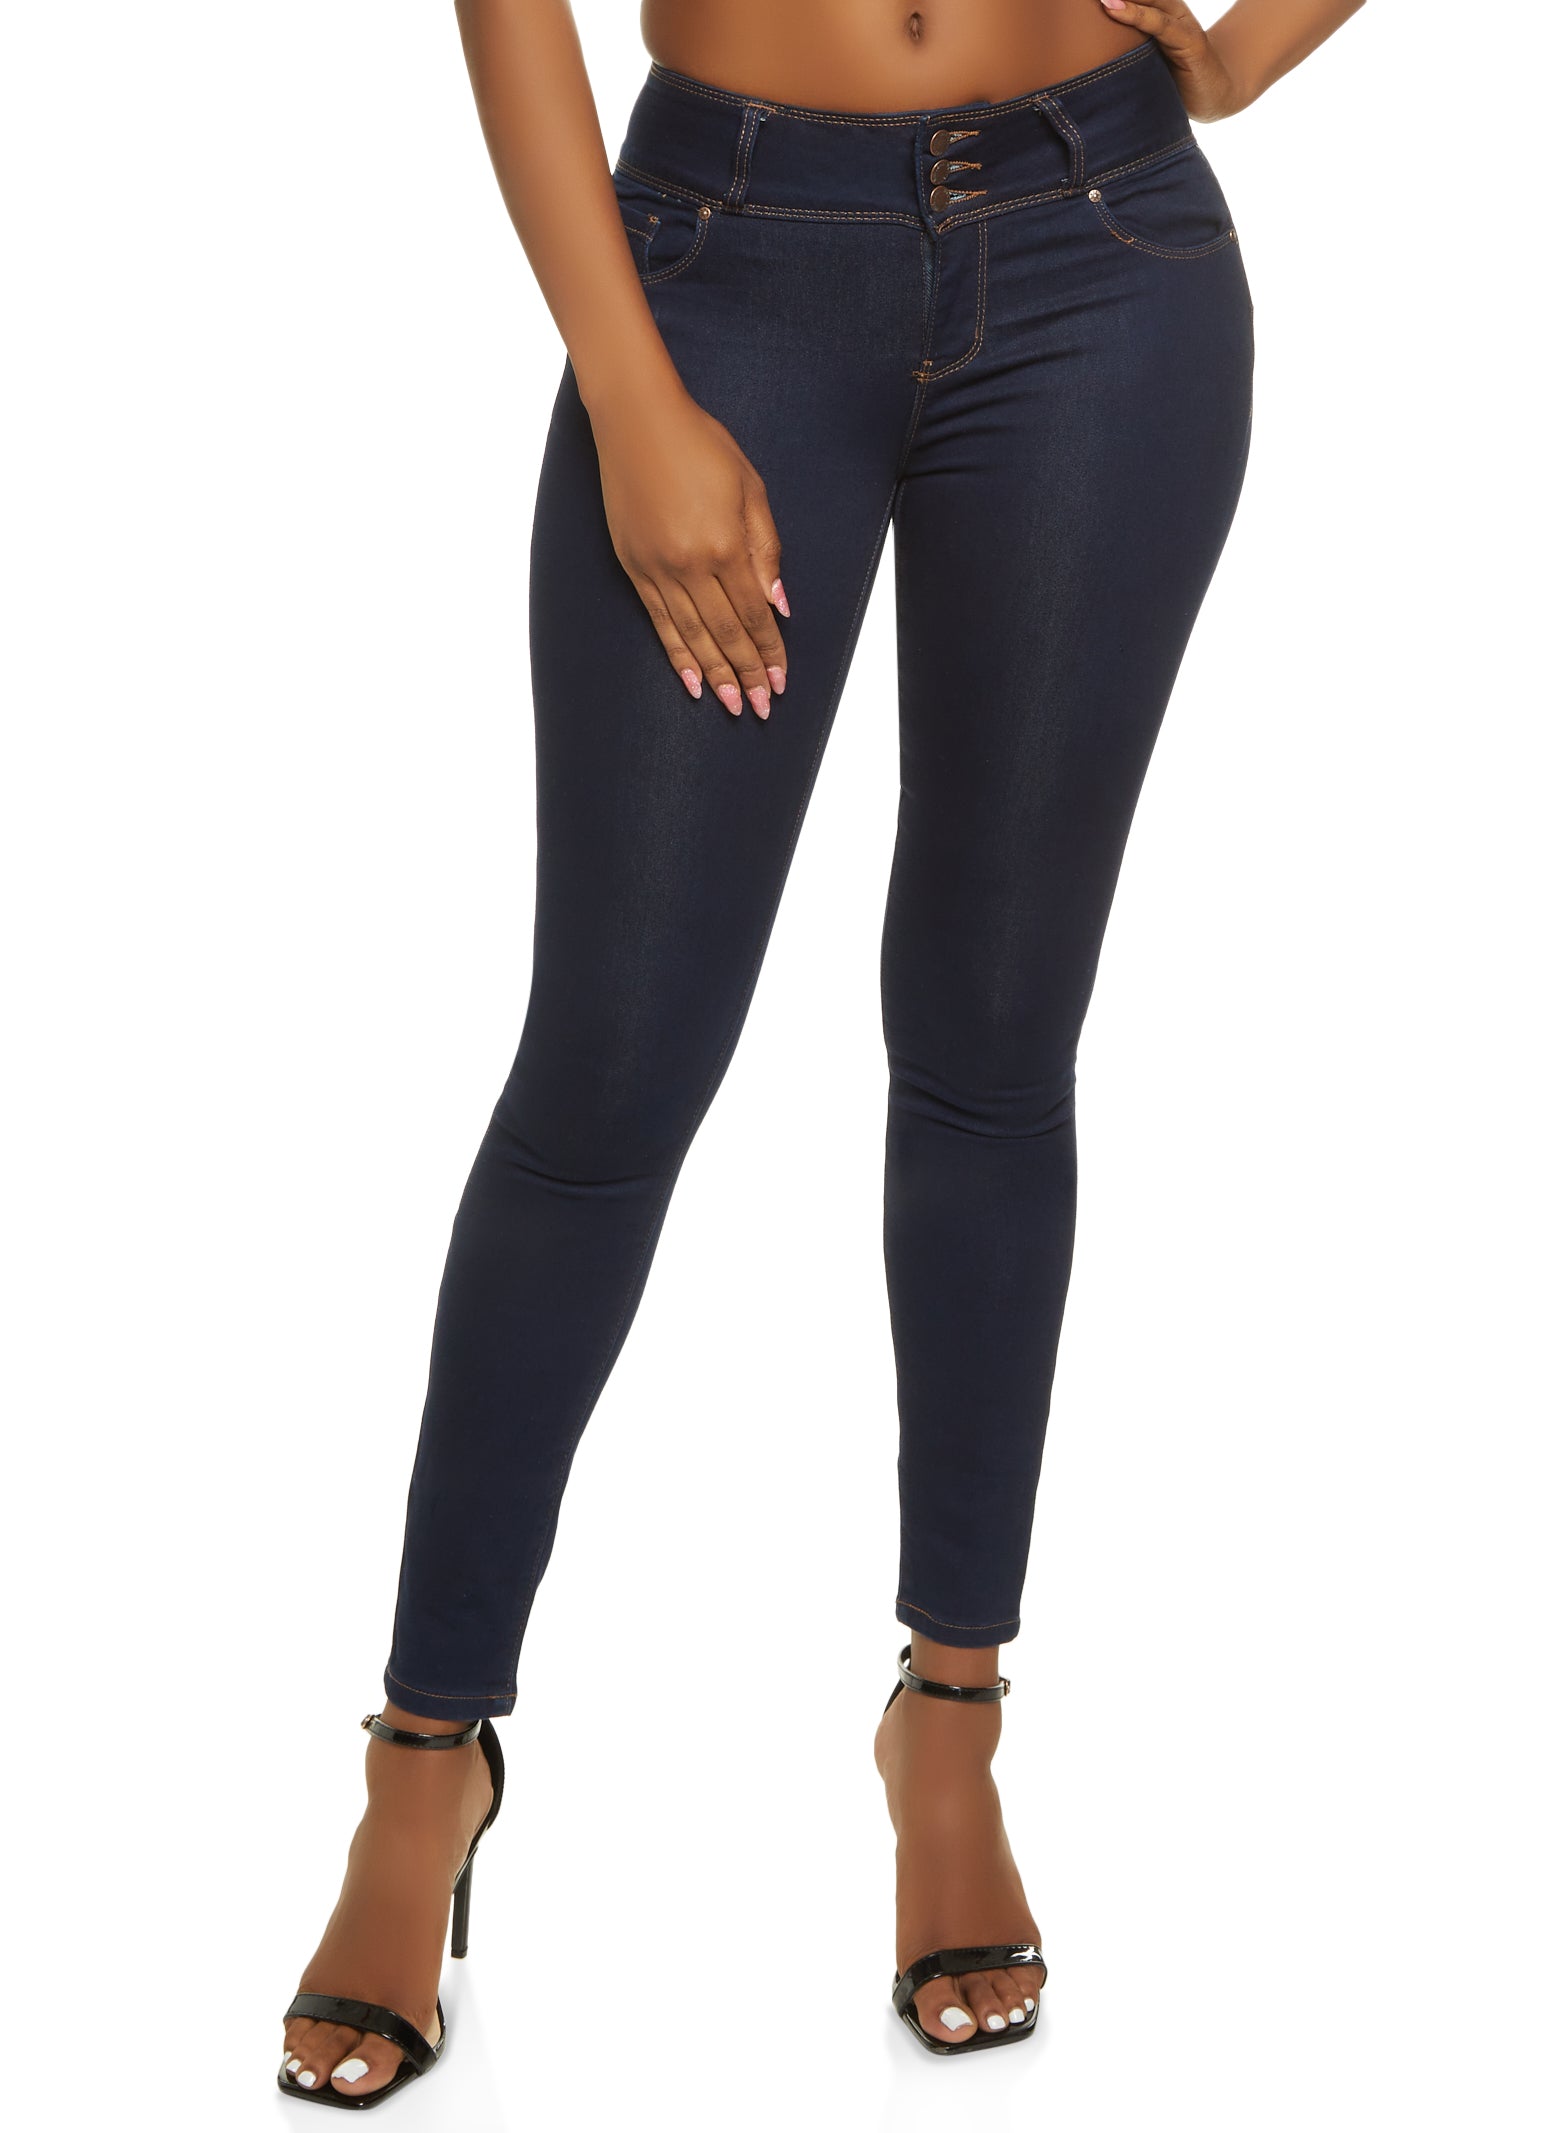 WAX 3 Button Skinny Jeans